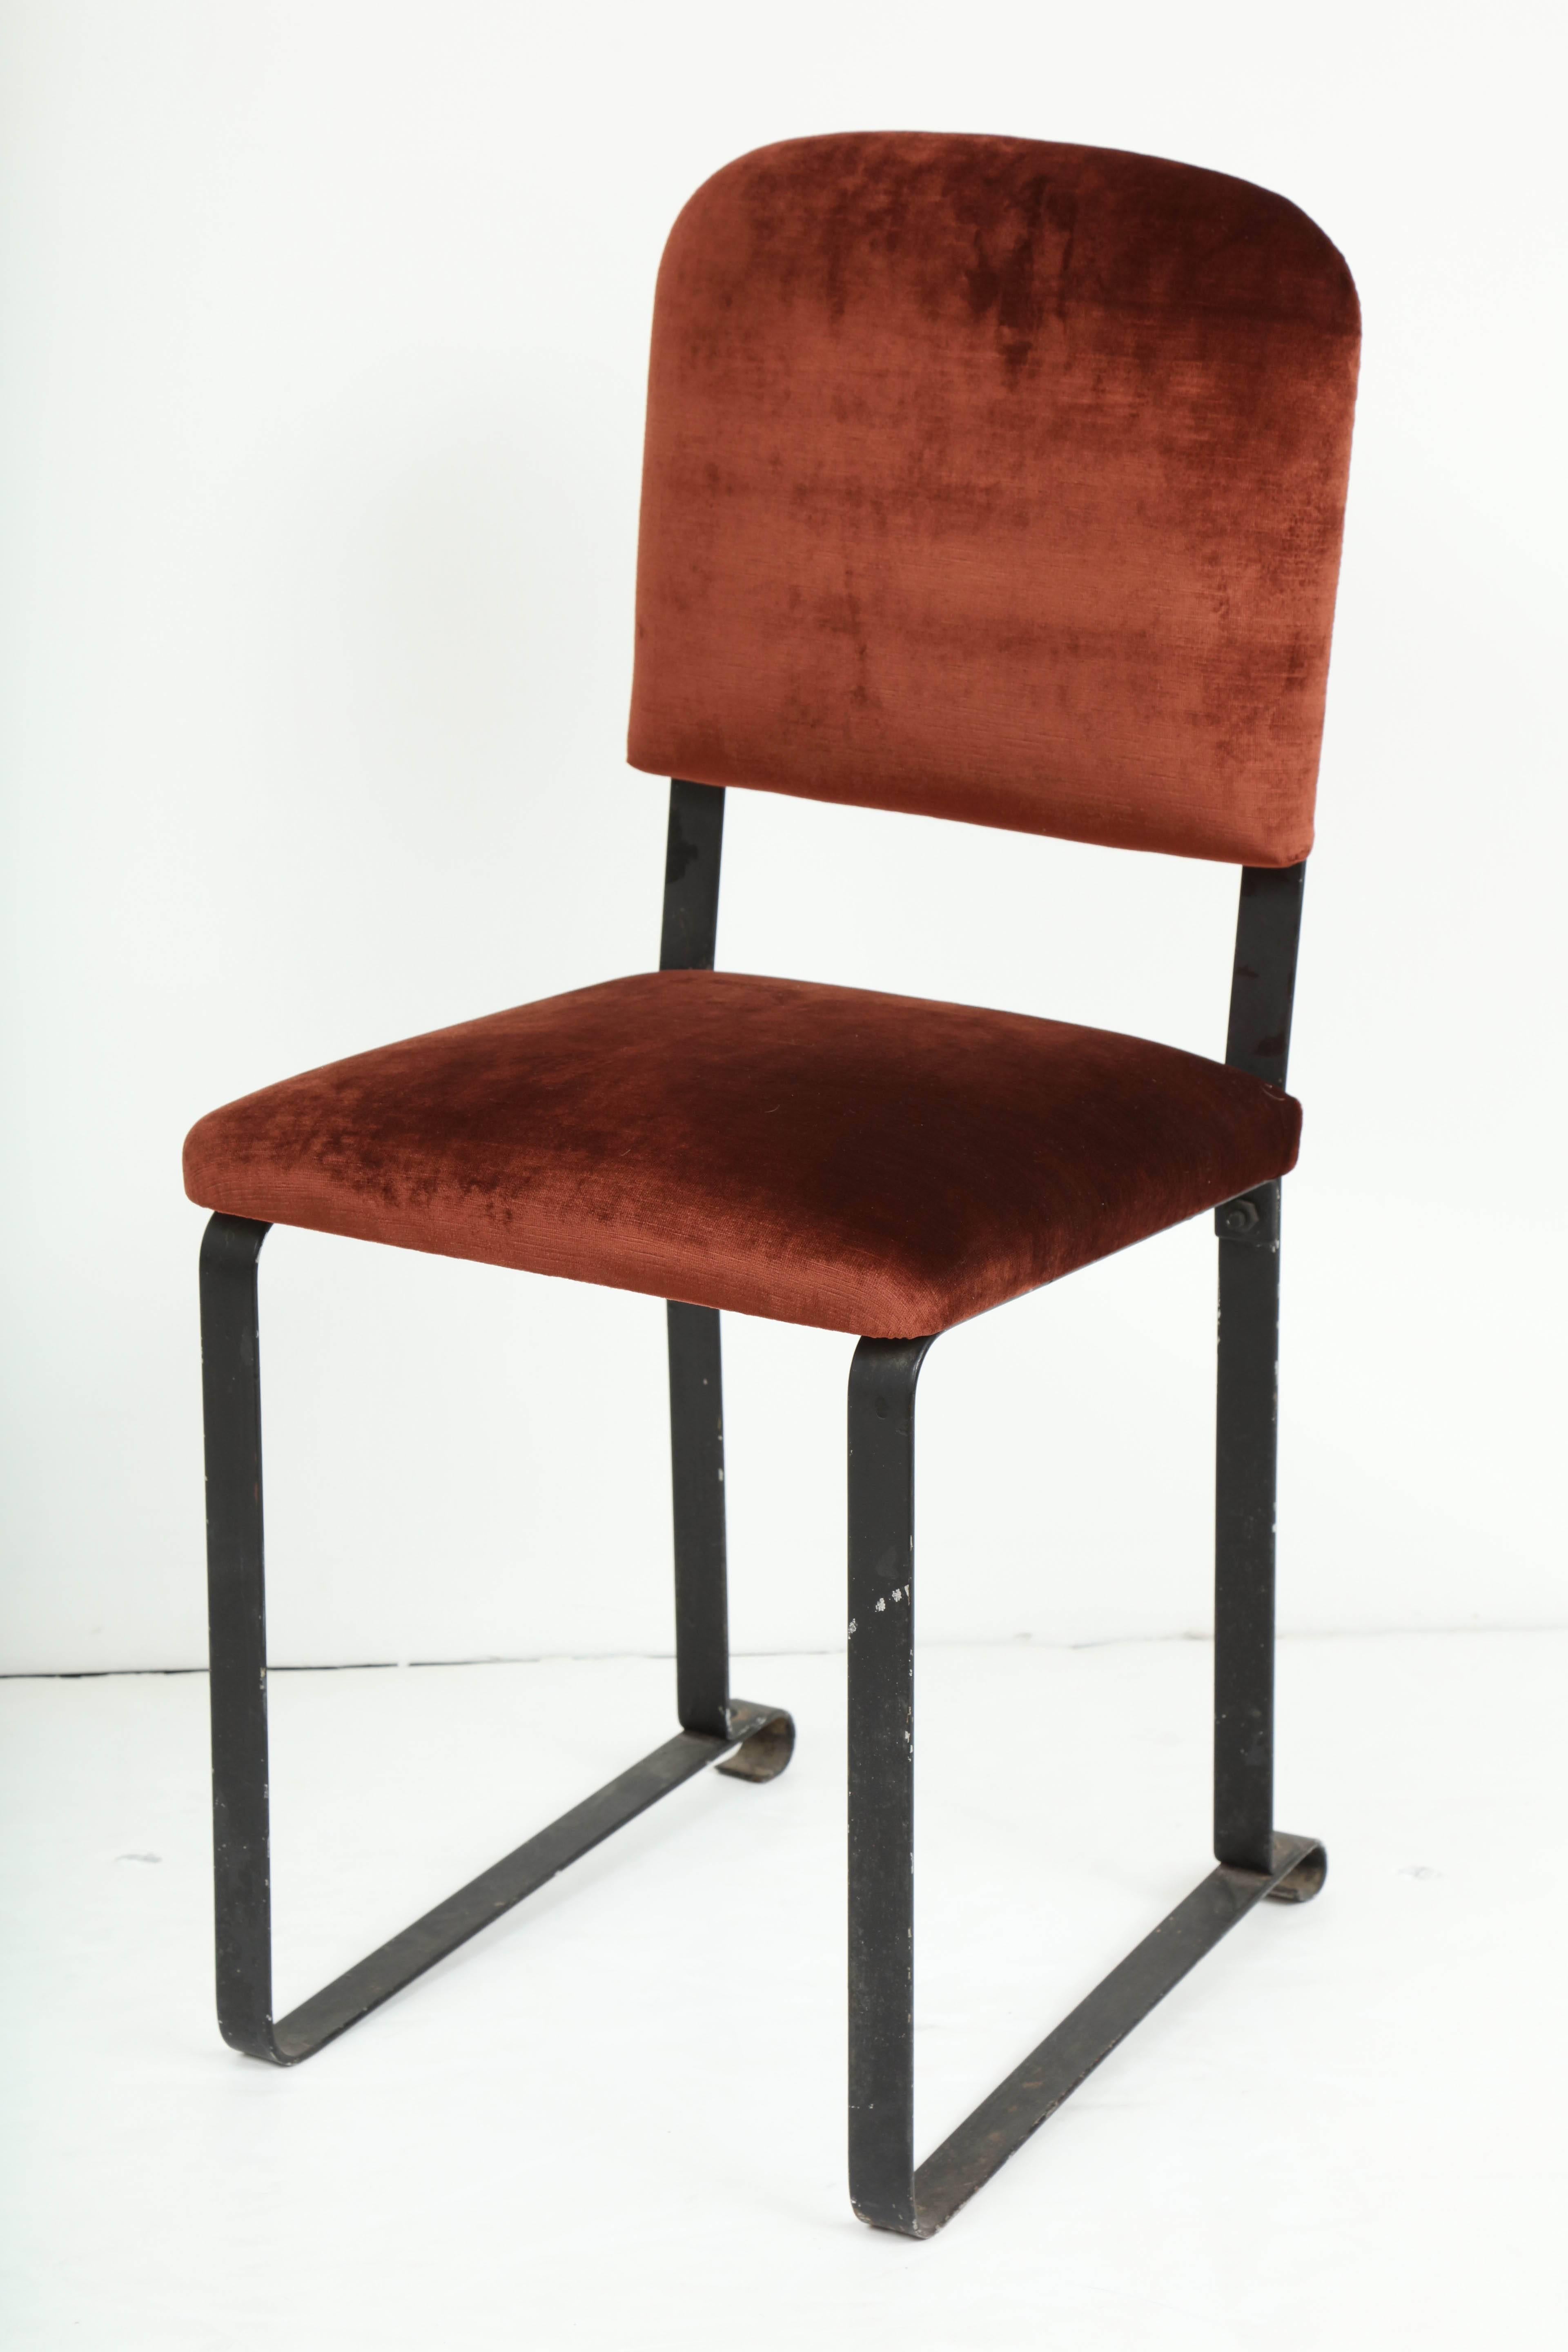 Iron side chair circa 1940 upholstered in cognac velvet with French natural nailhead trim.